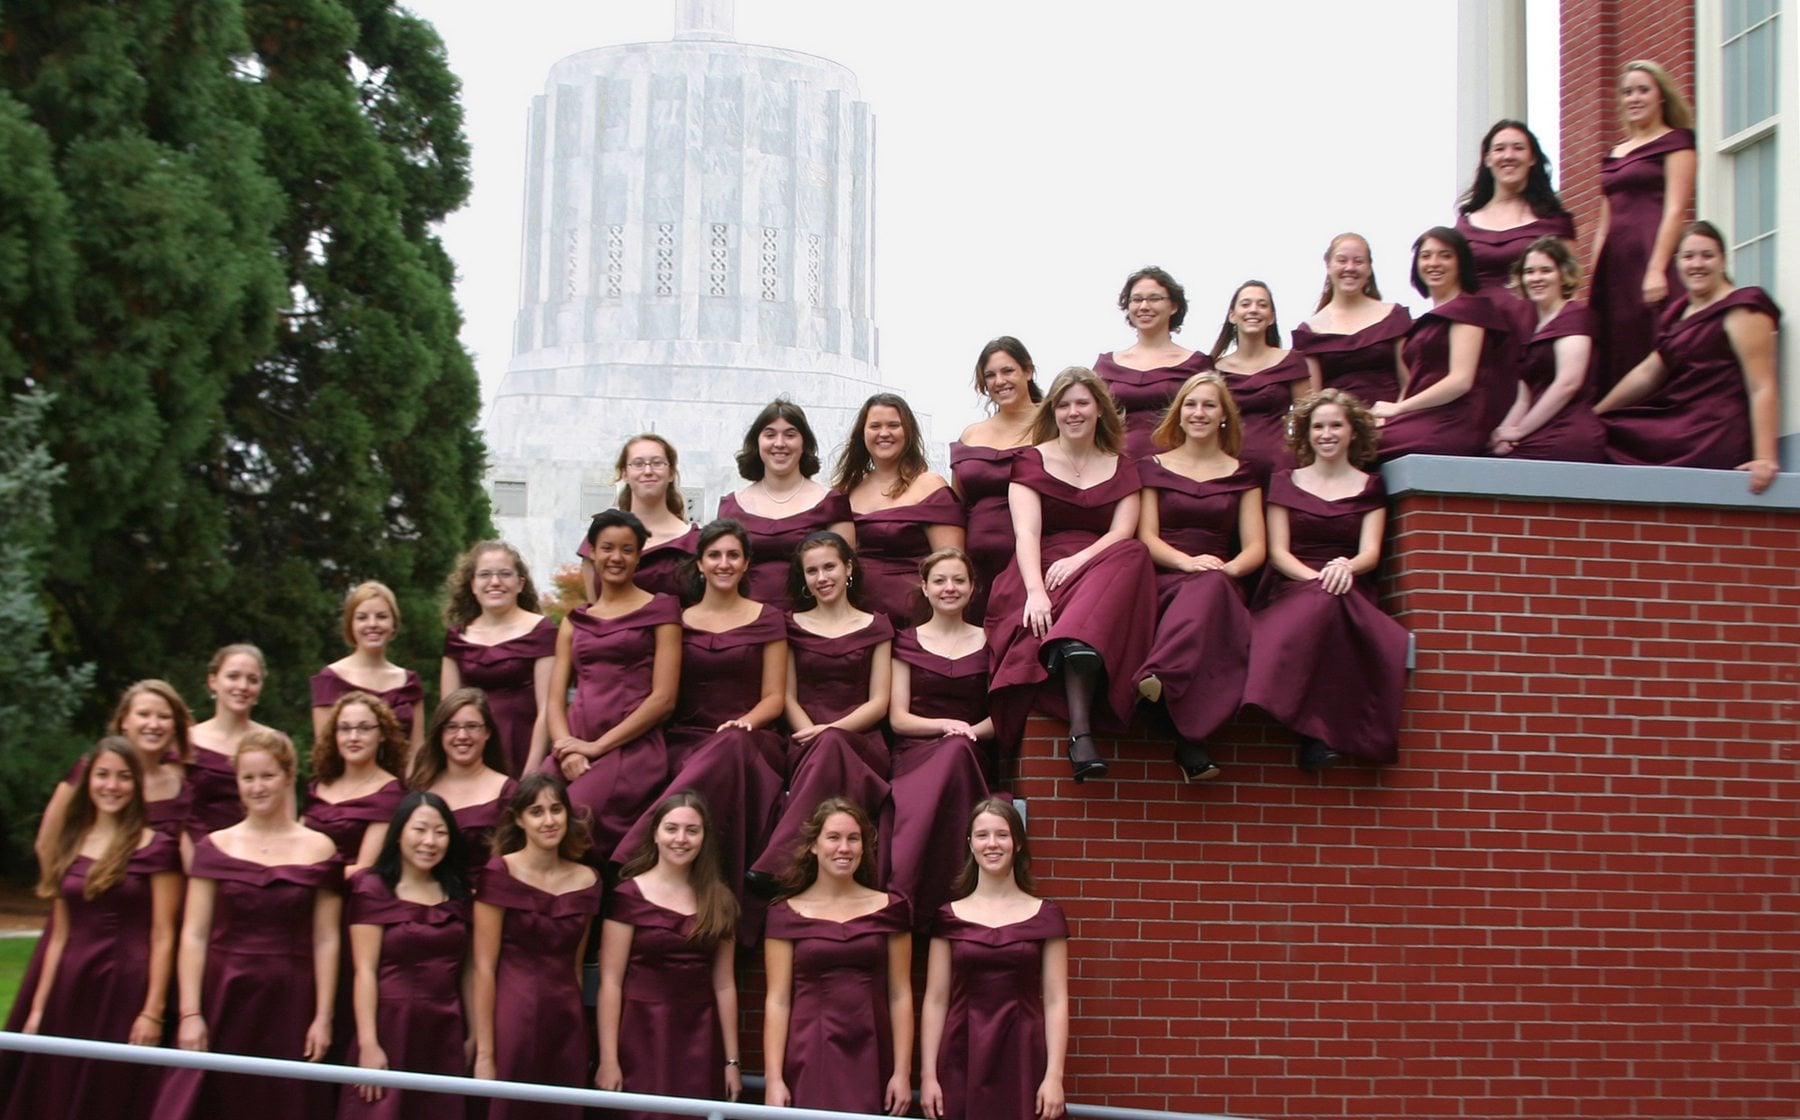 Willamette University's Voce Femminile women's choir will perform Saturday and Sunday with the Vancouver Symphony.